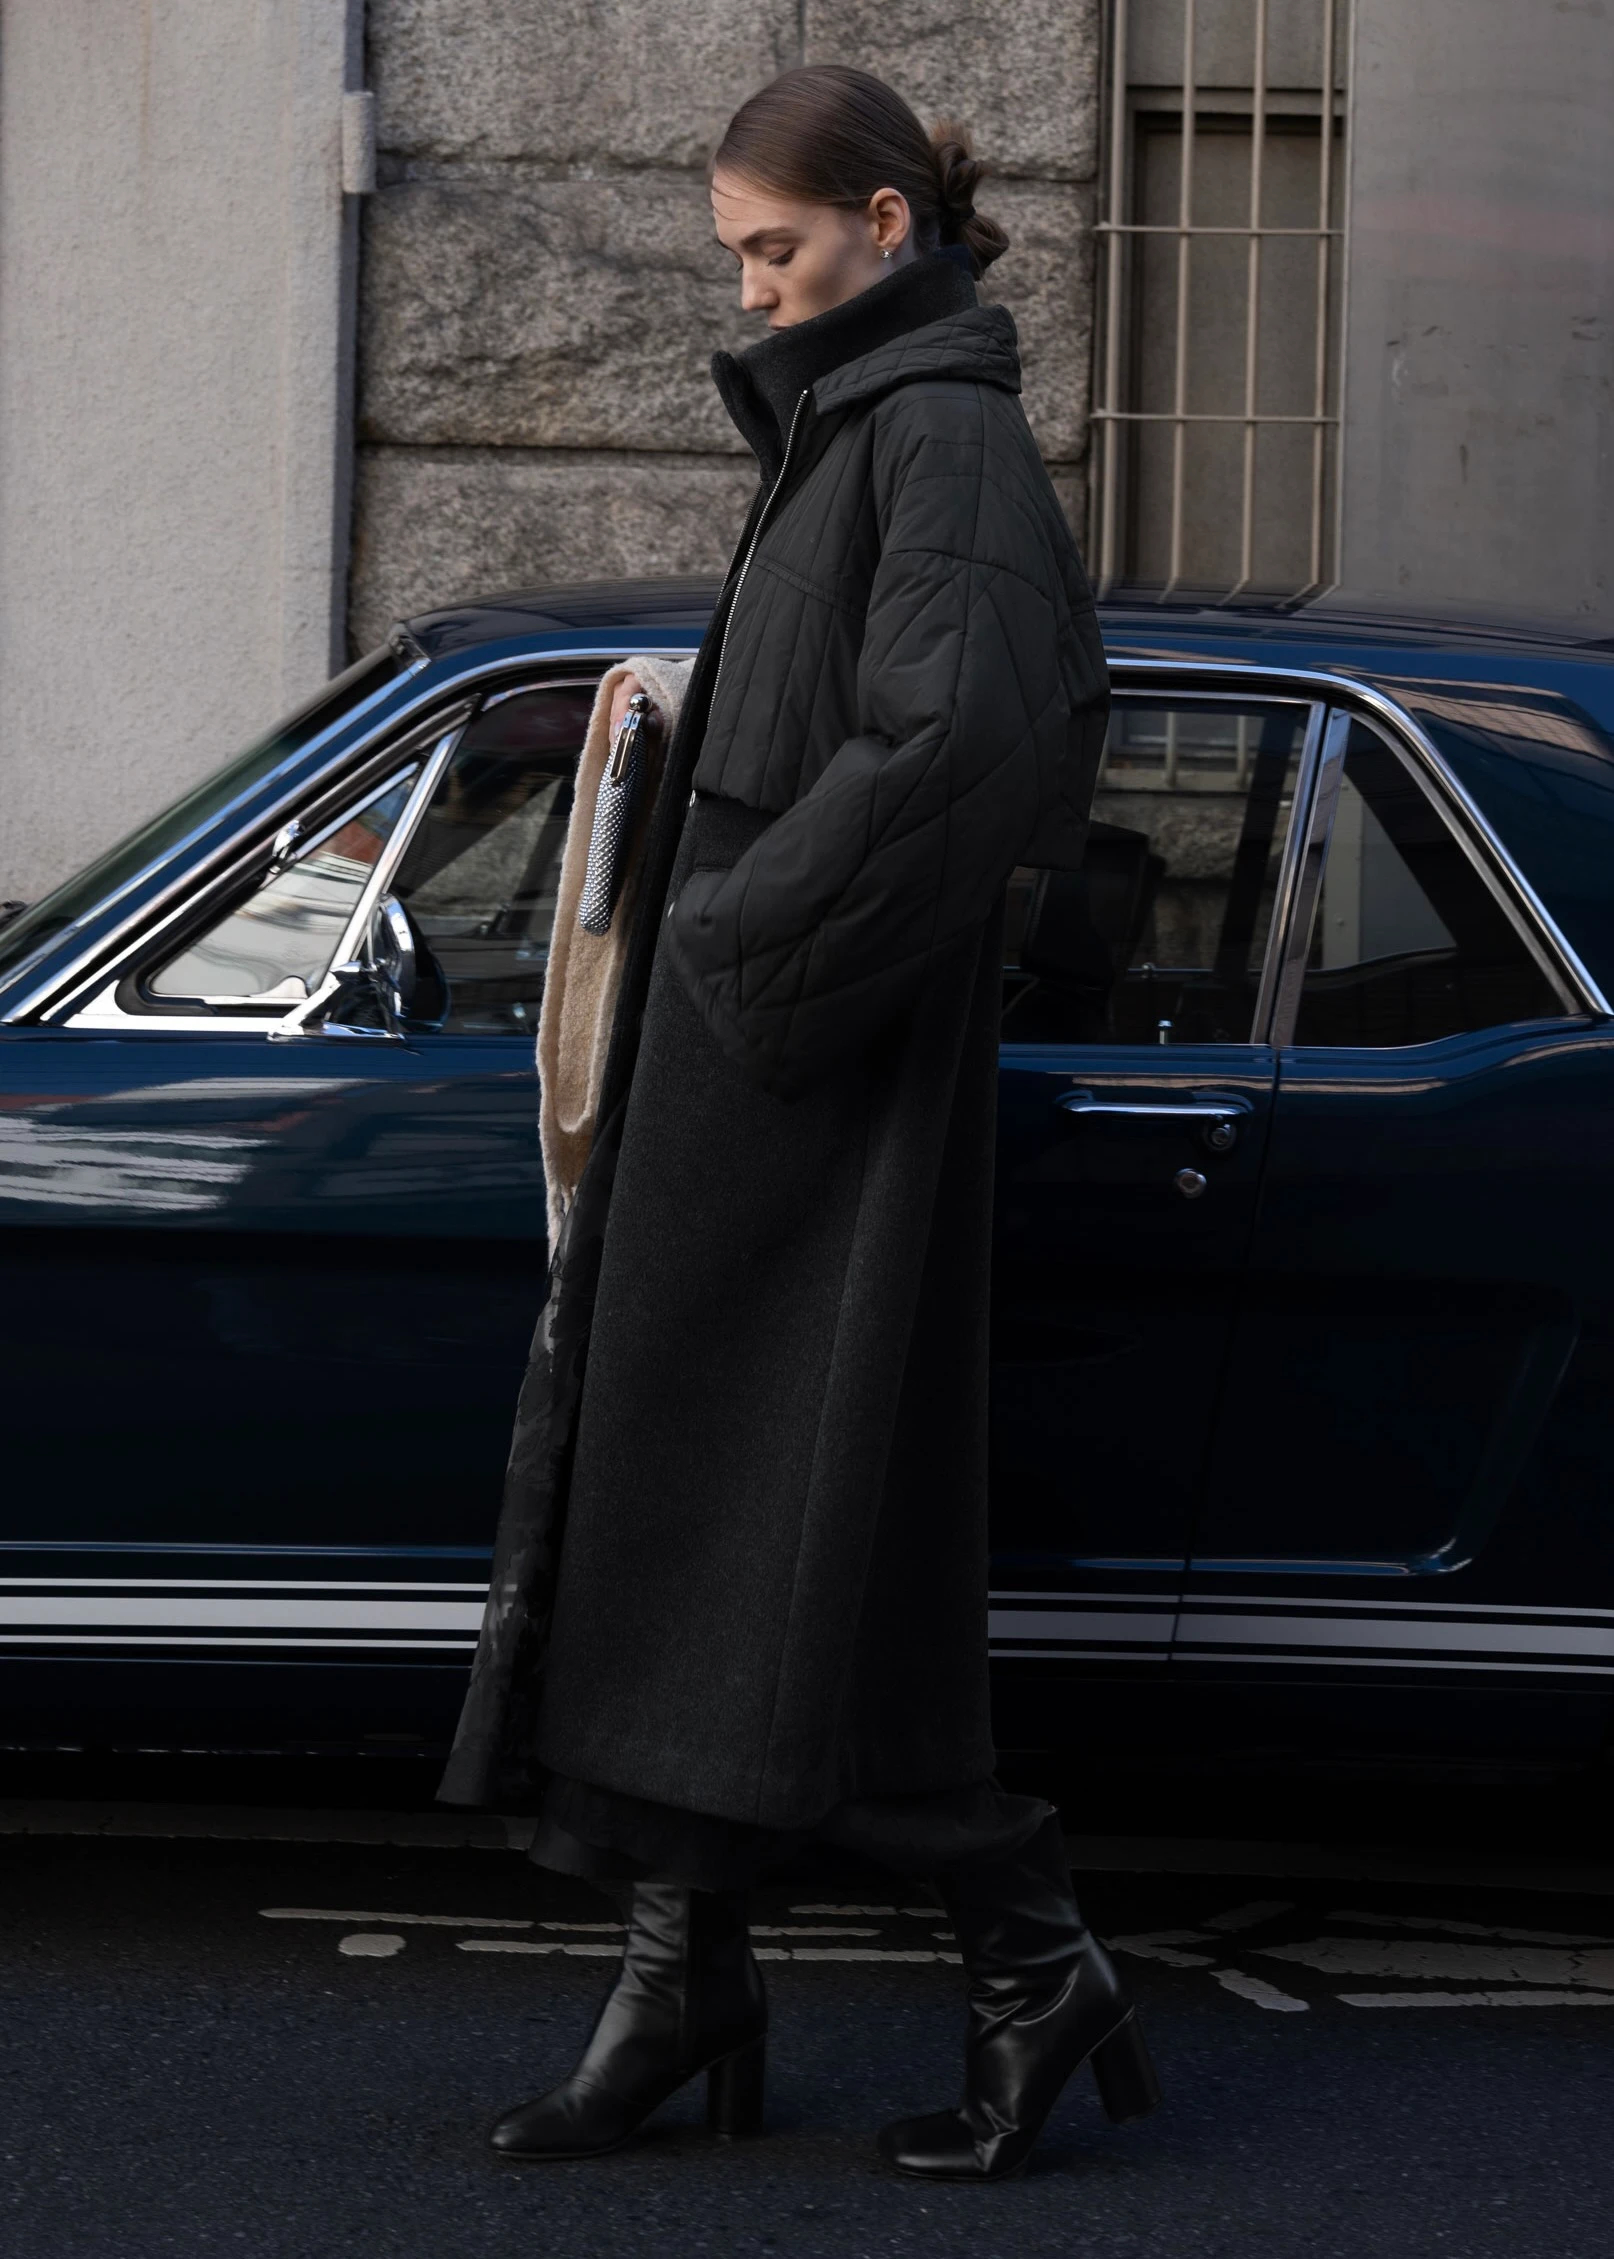 willfully jersey melton trench long coat